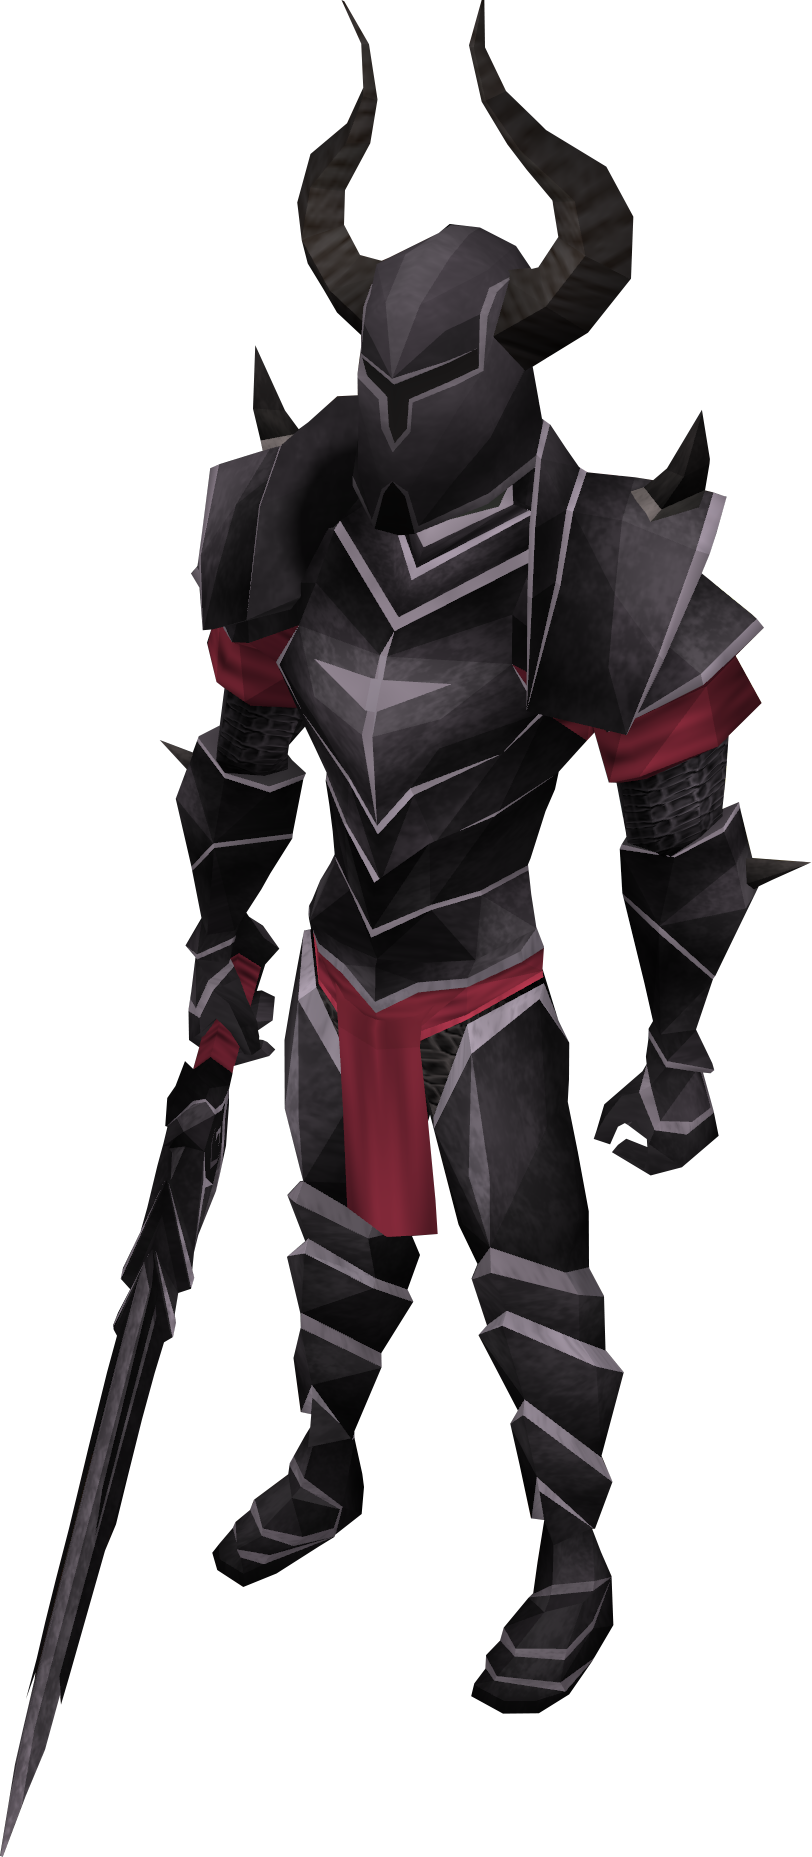 Black Knight - The RuneScape Wiki - 812 x 1857 png 559kB